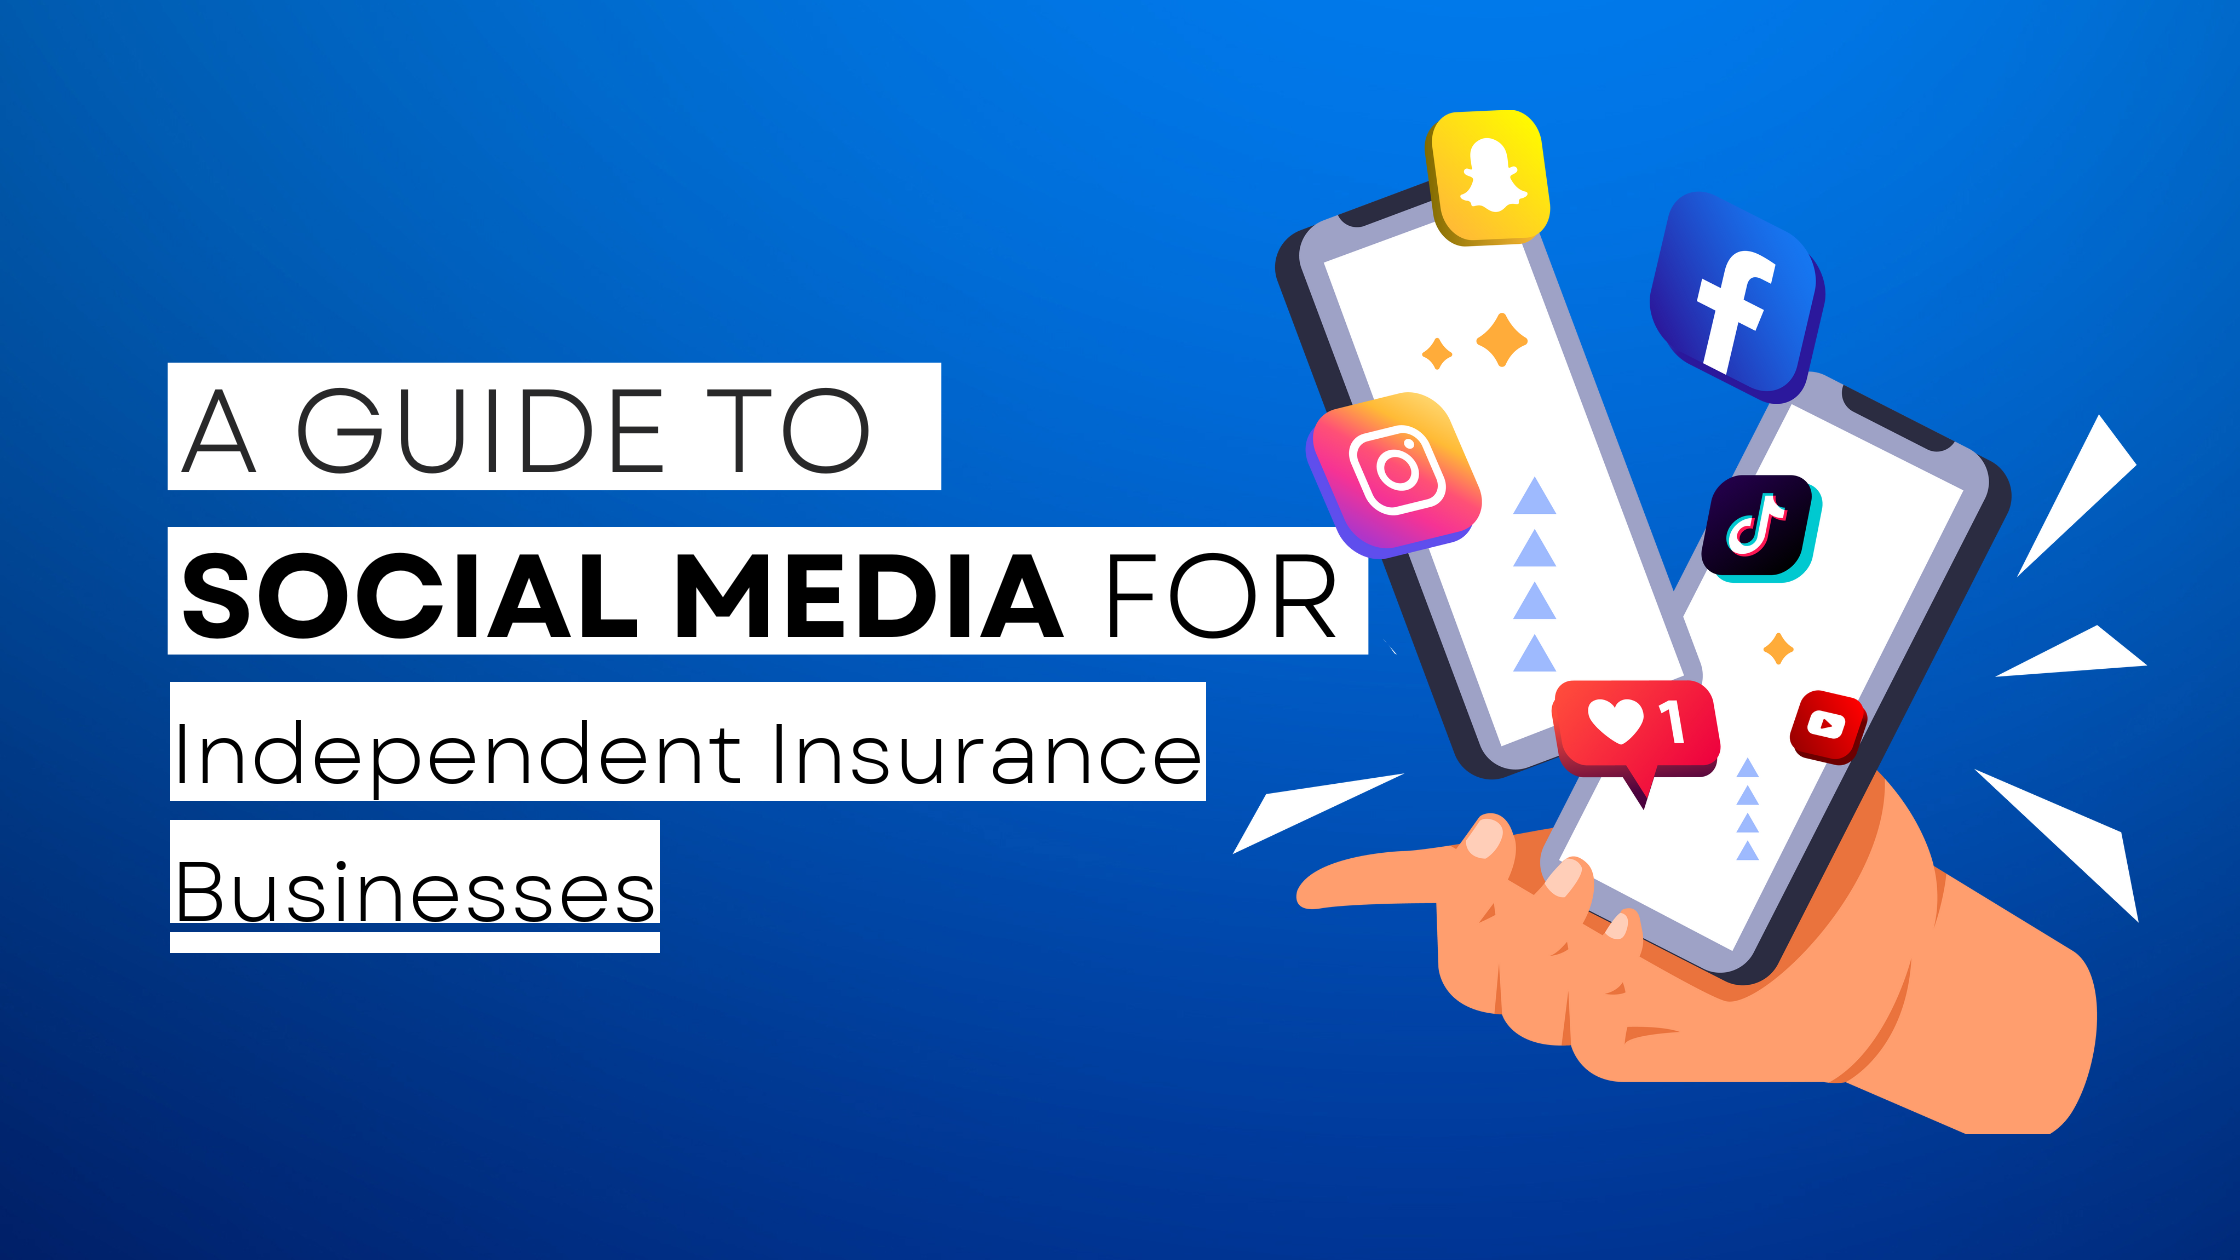 How to start Independent Insurance on social media